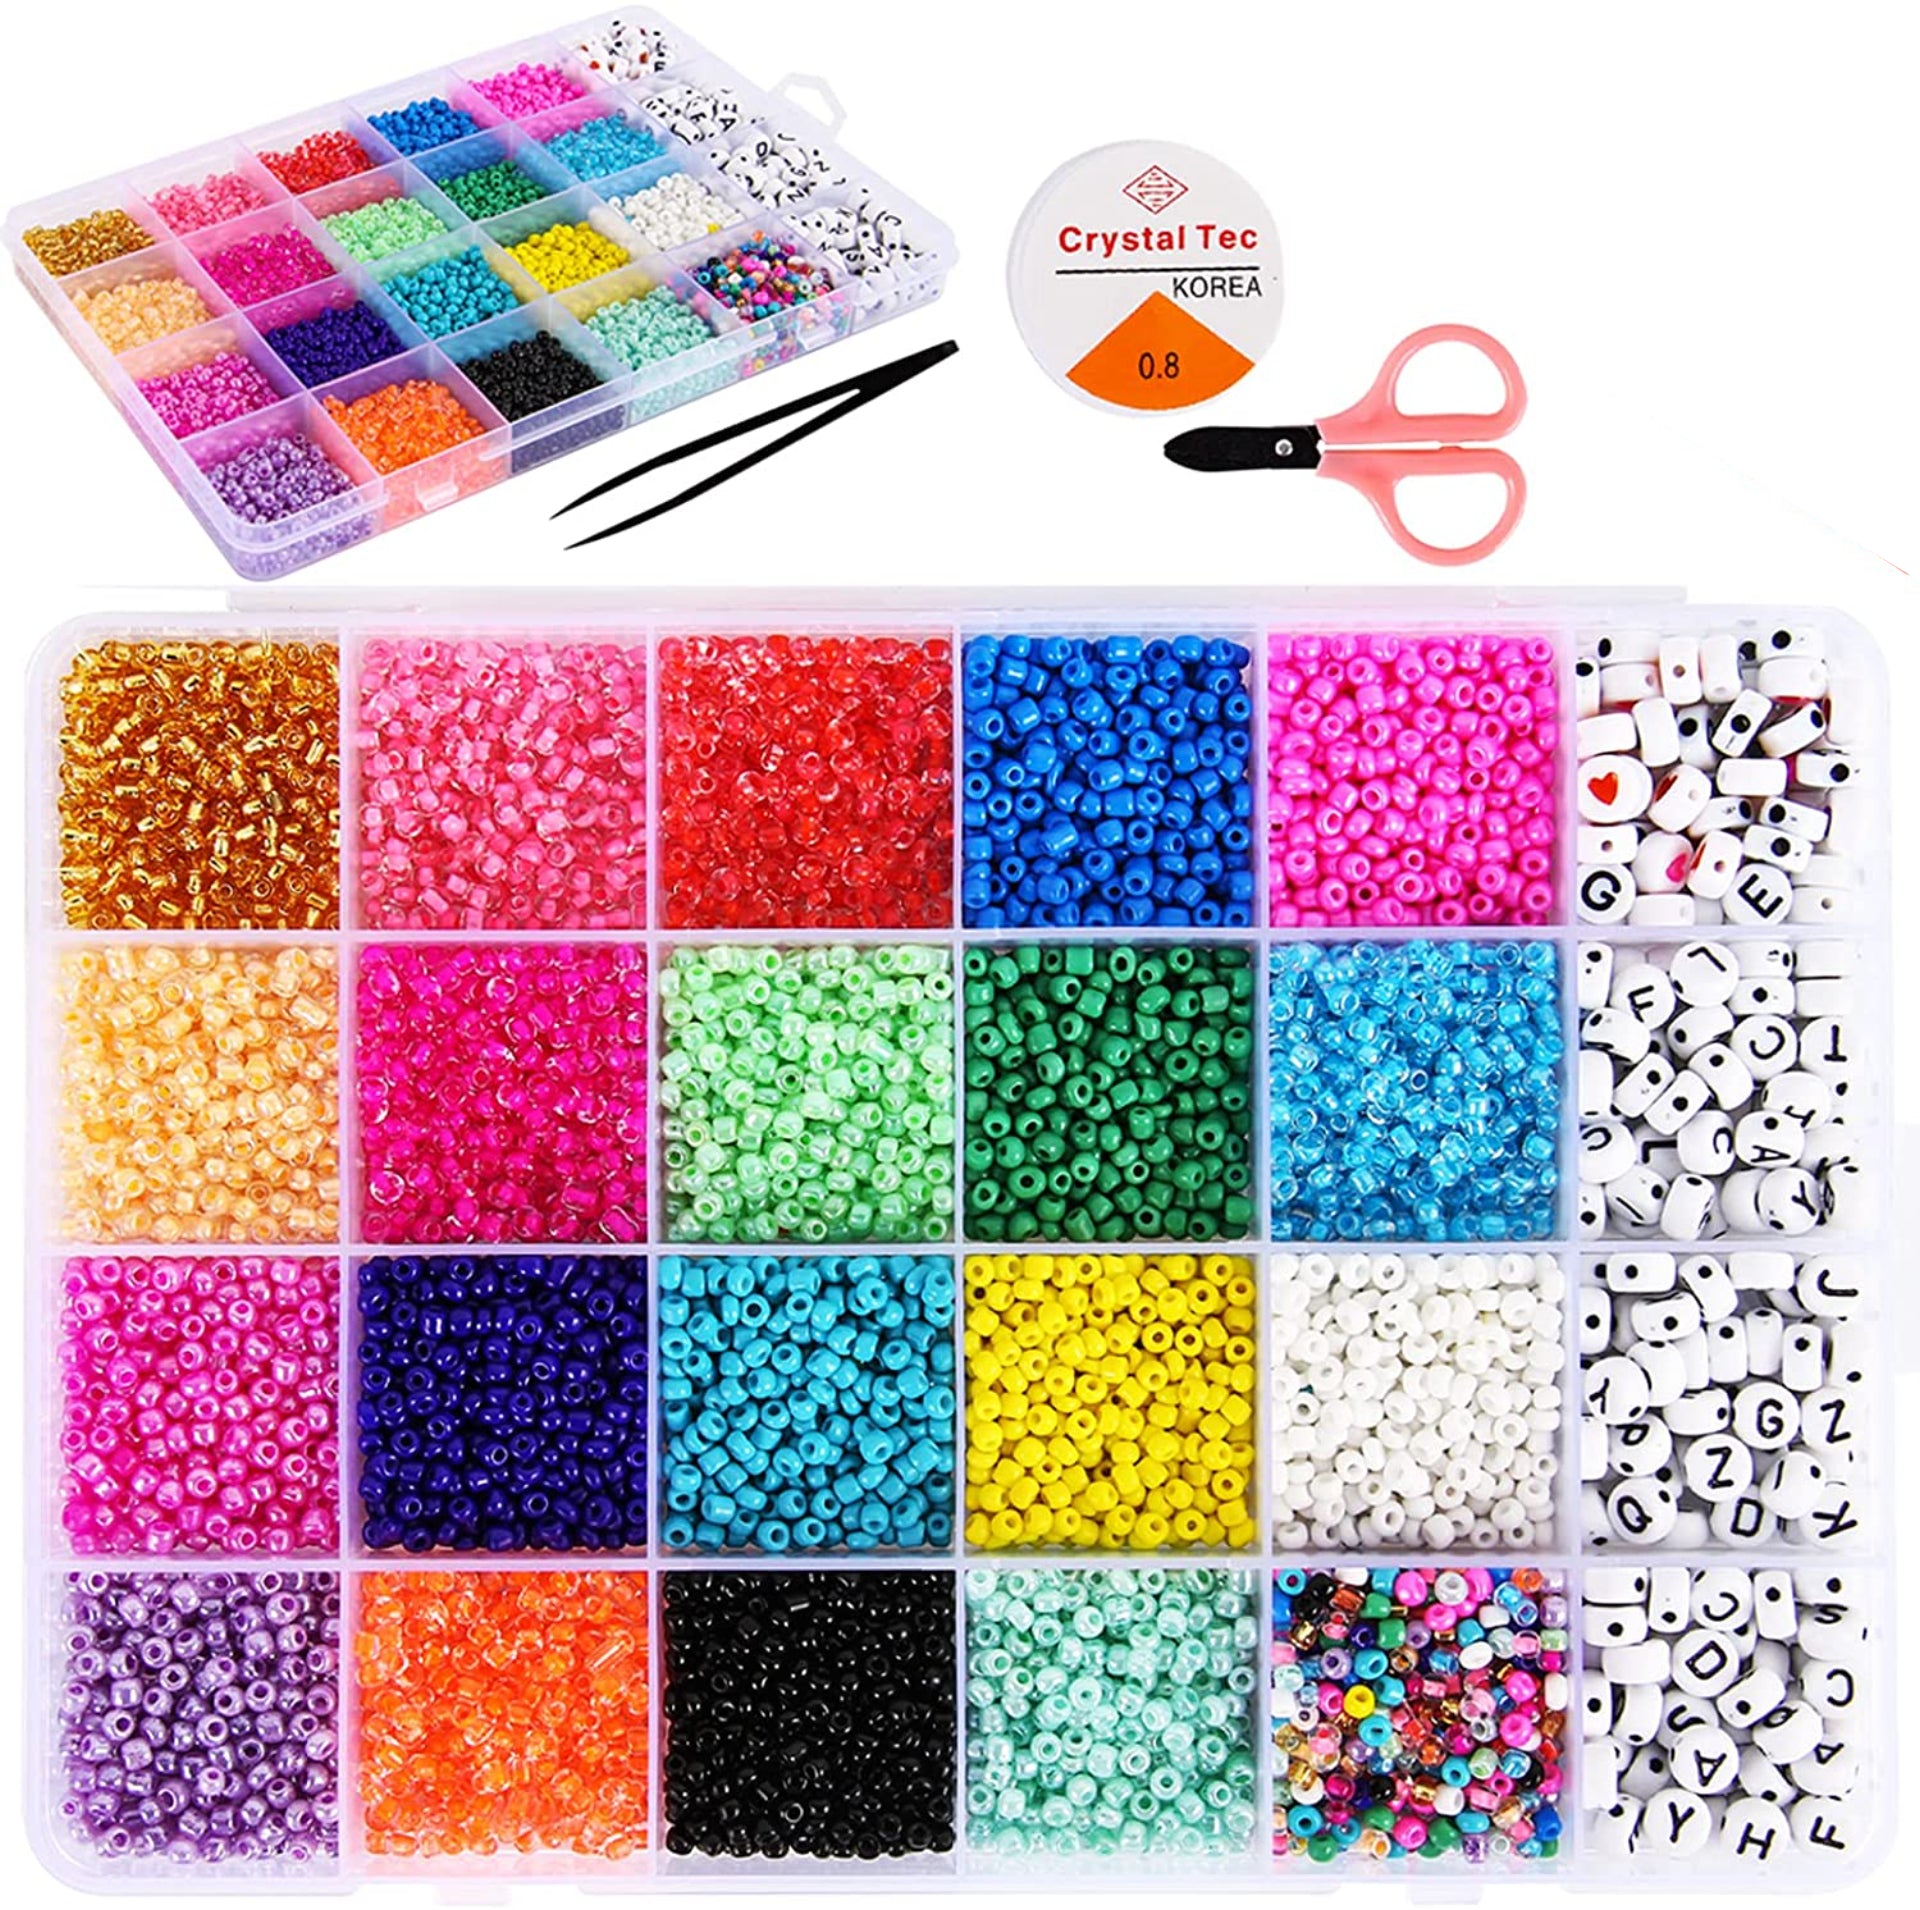 FUNZBO Kids Jewelry Making Kit for Girls Toys - Snap Pop Beads Pop-Bead Art and Craft Kits DIY Bracelets Necklace Hairband and Rings Toy for Age 3 4